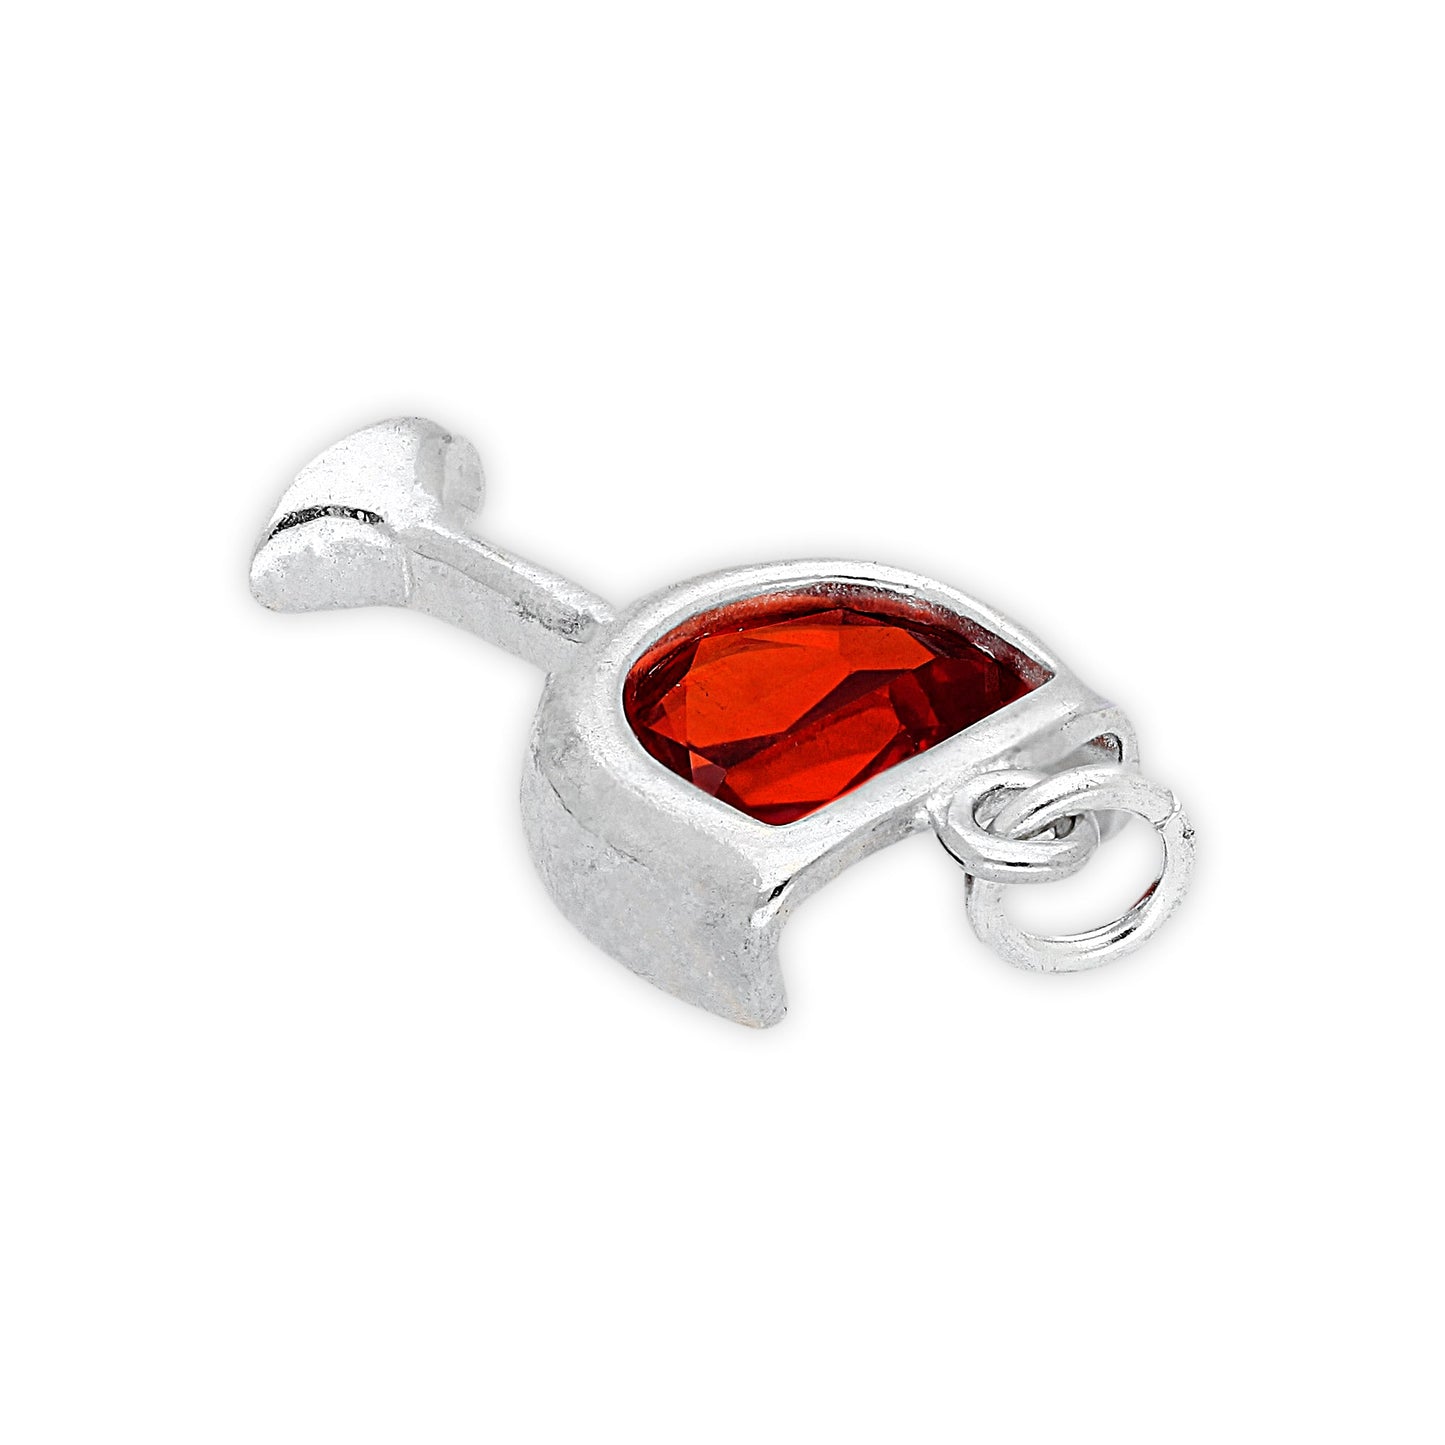 Sterling Silver Crystal Red Wine Glass Charm